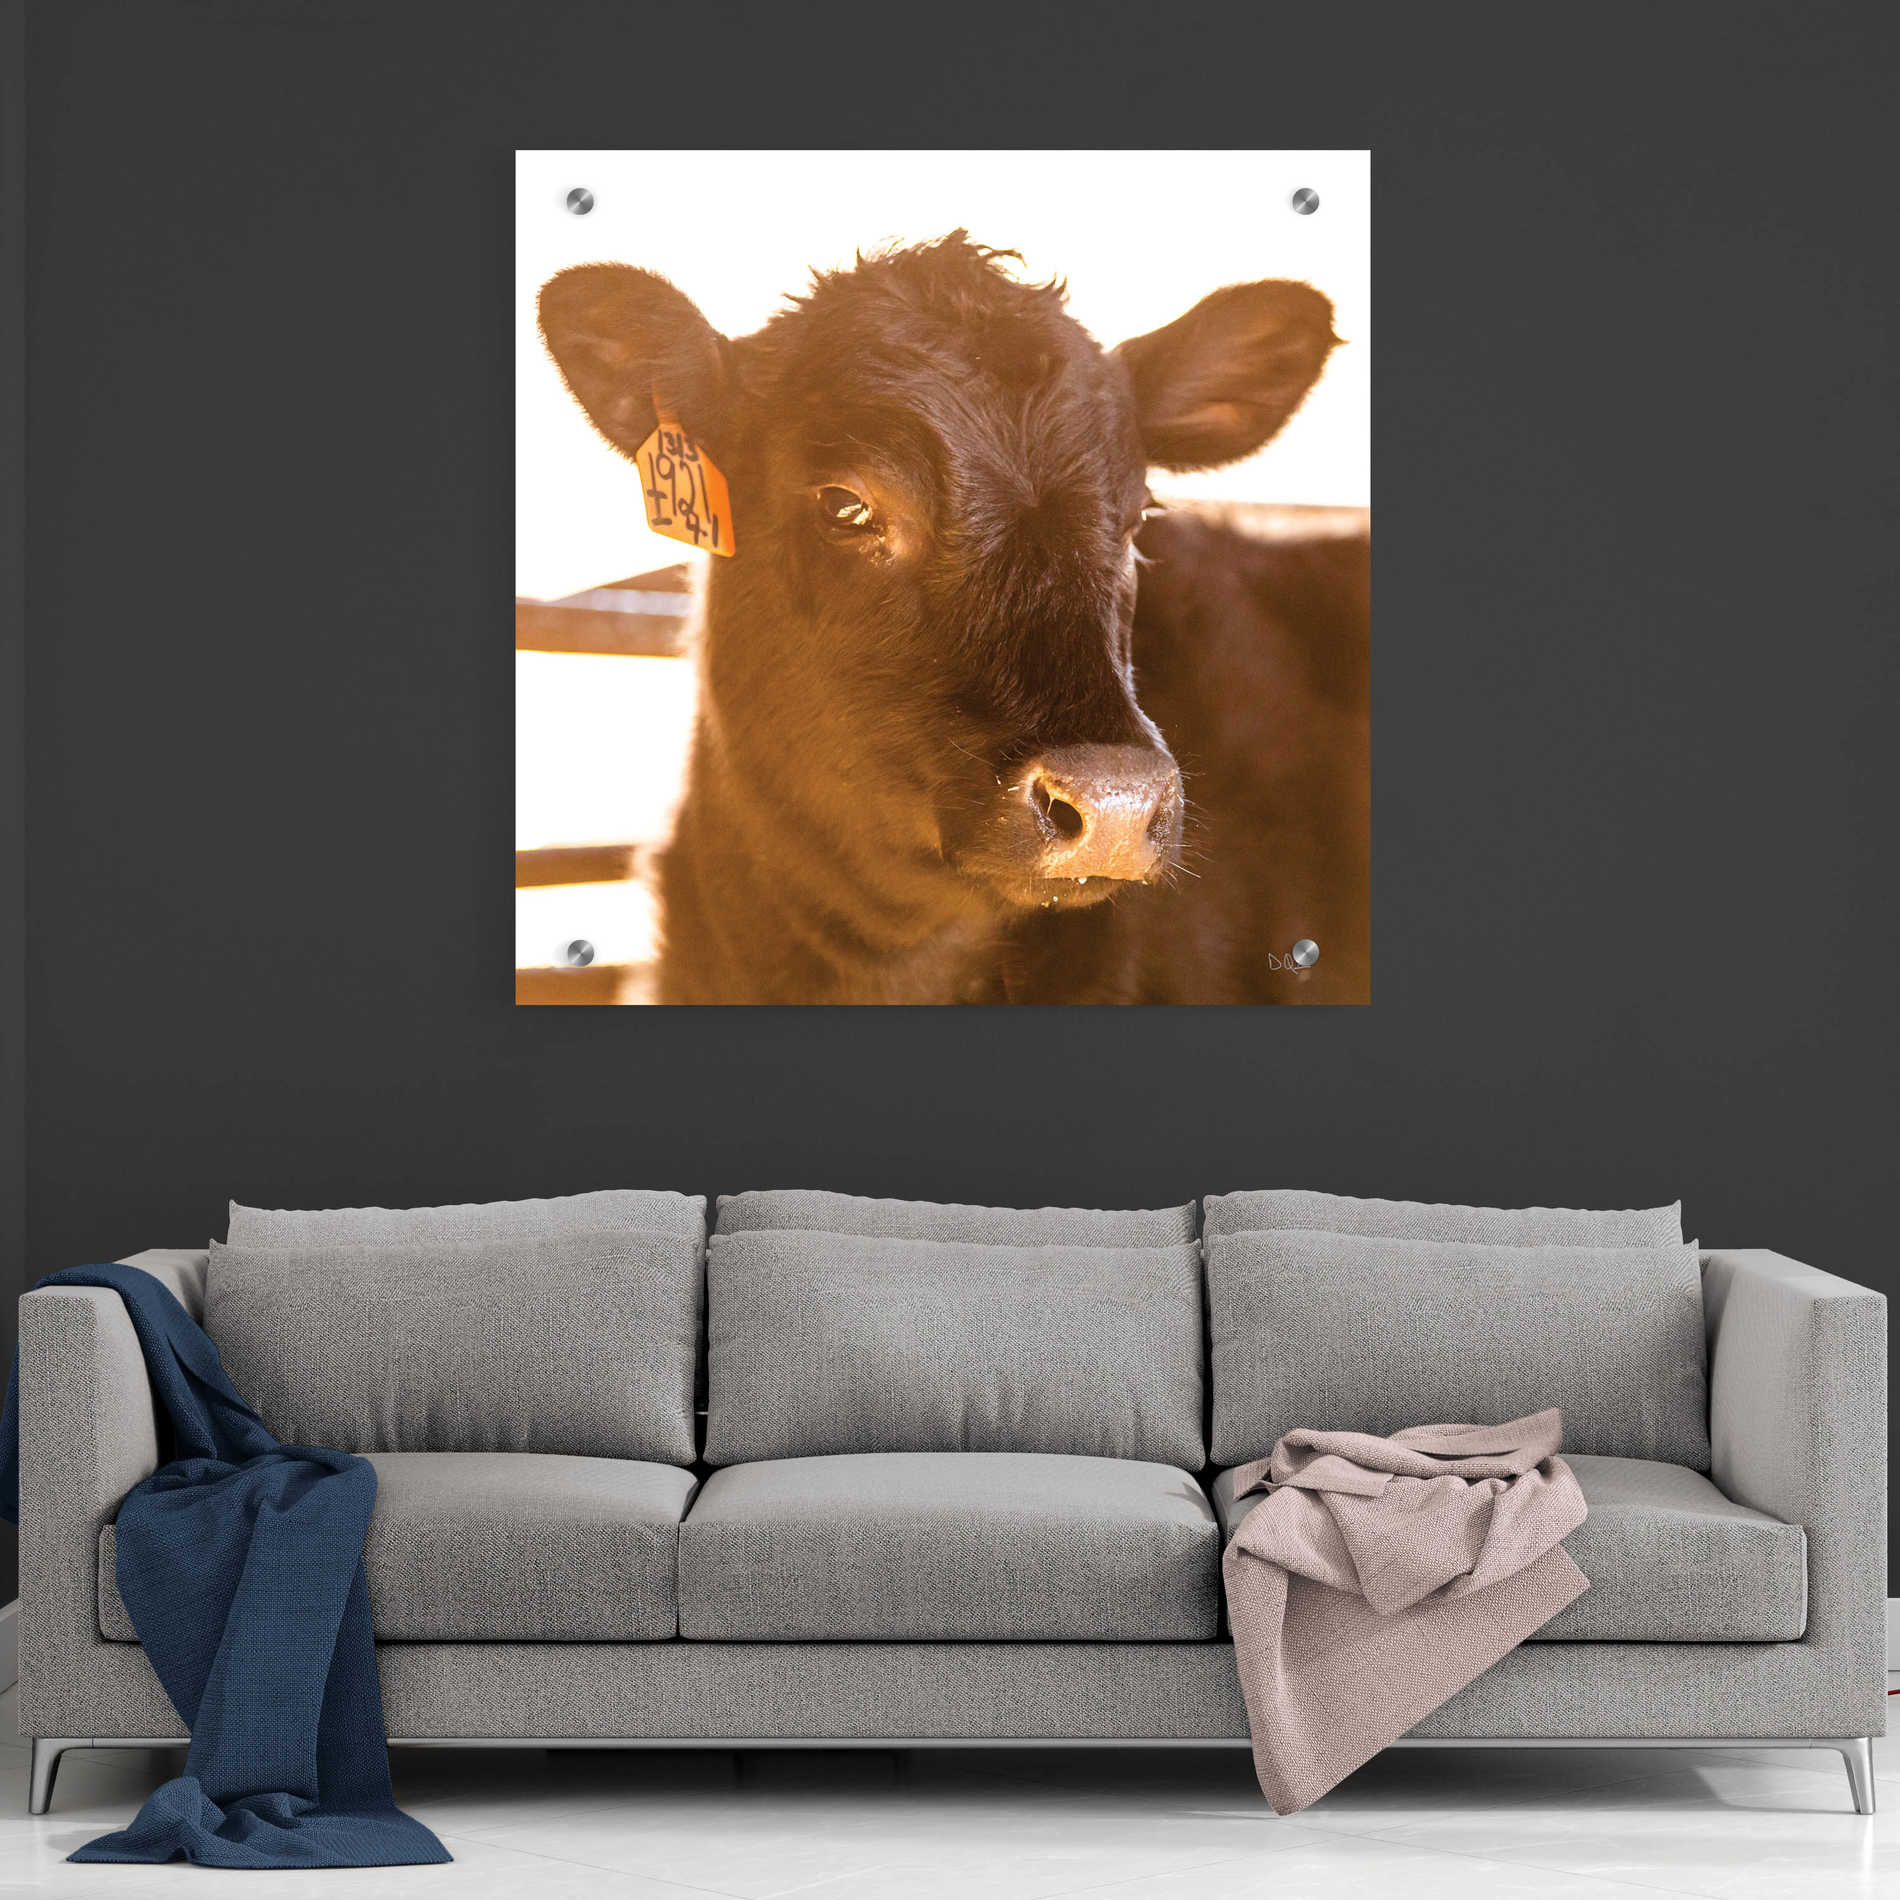 'Baby Cow I' by Donnie Quillen, Acrylic Wall Art,36x36